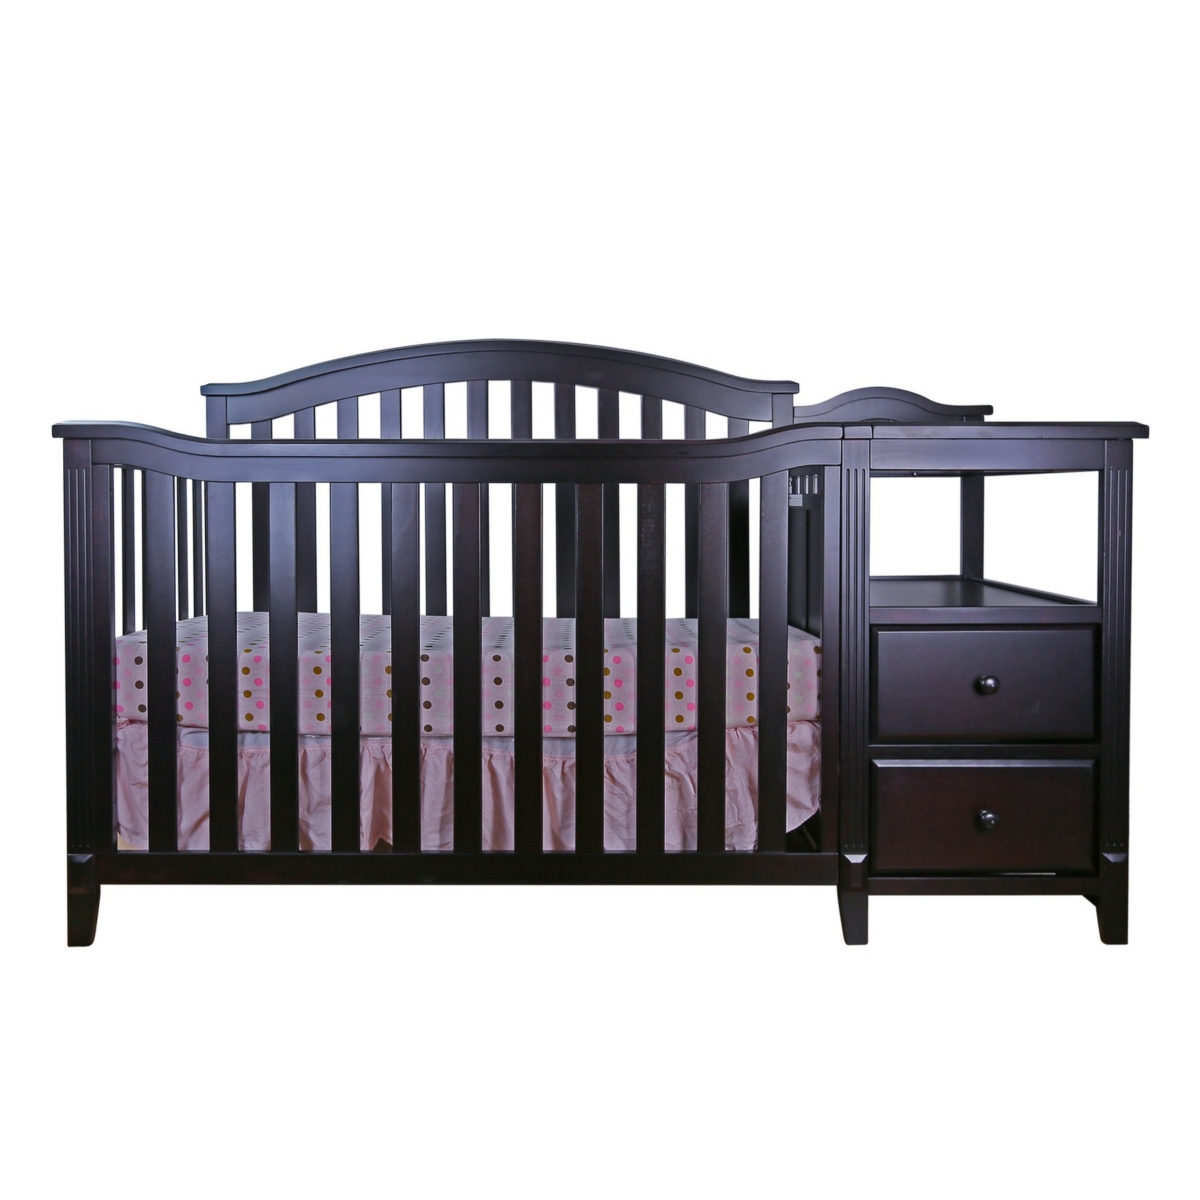 ATHENA KALI 4-IN-1 CRIB AND CHANGER